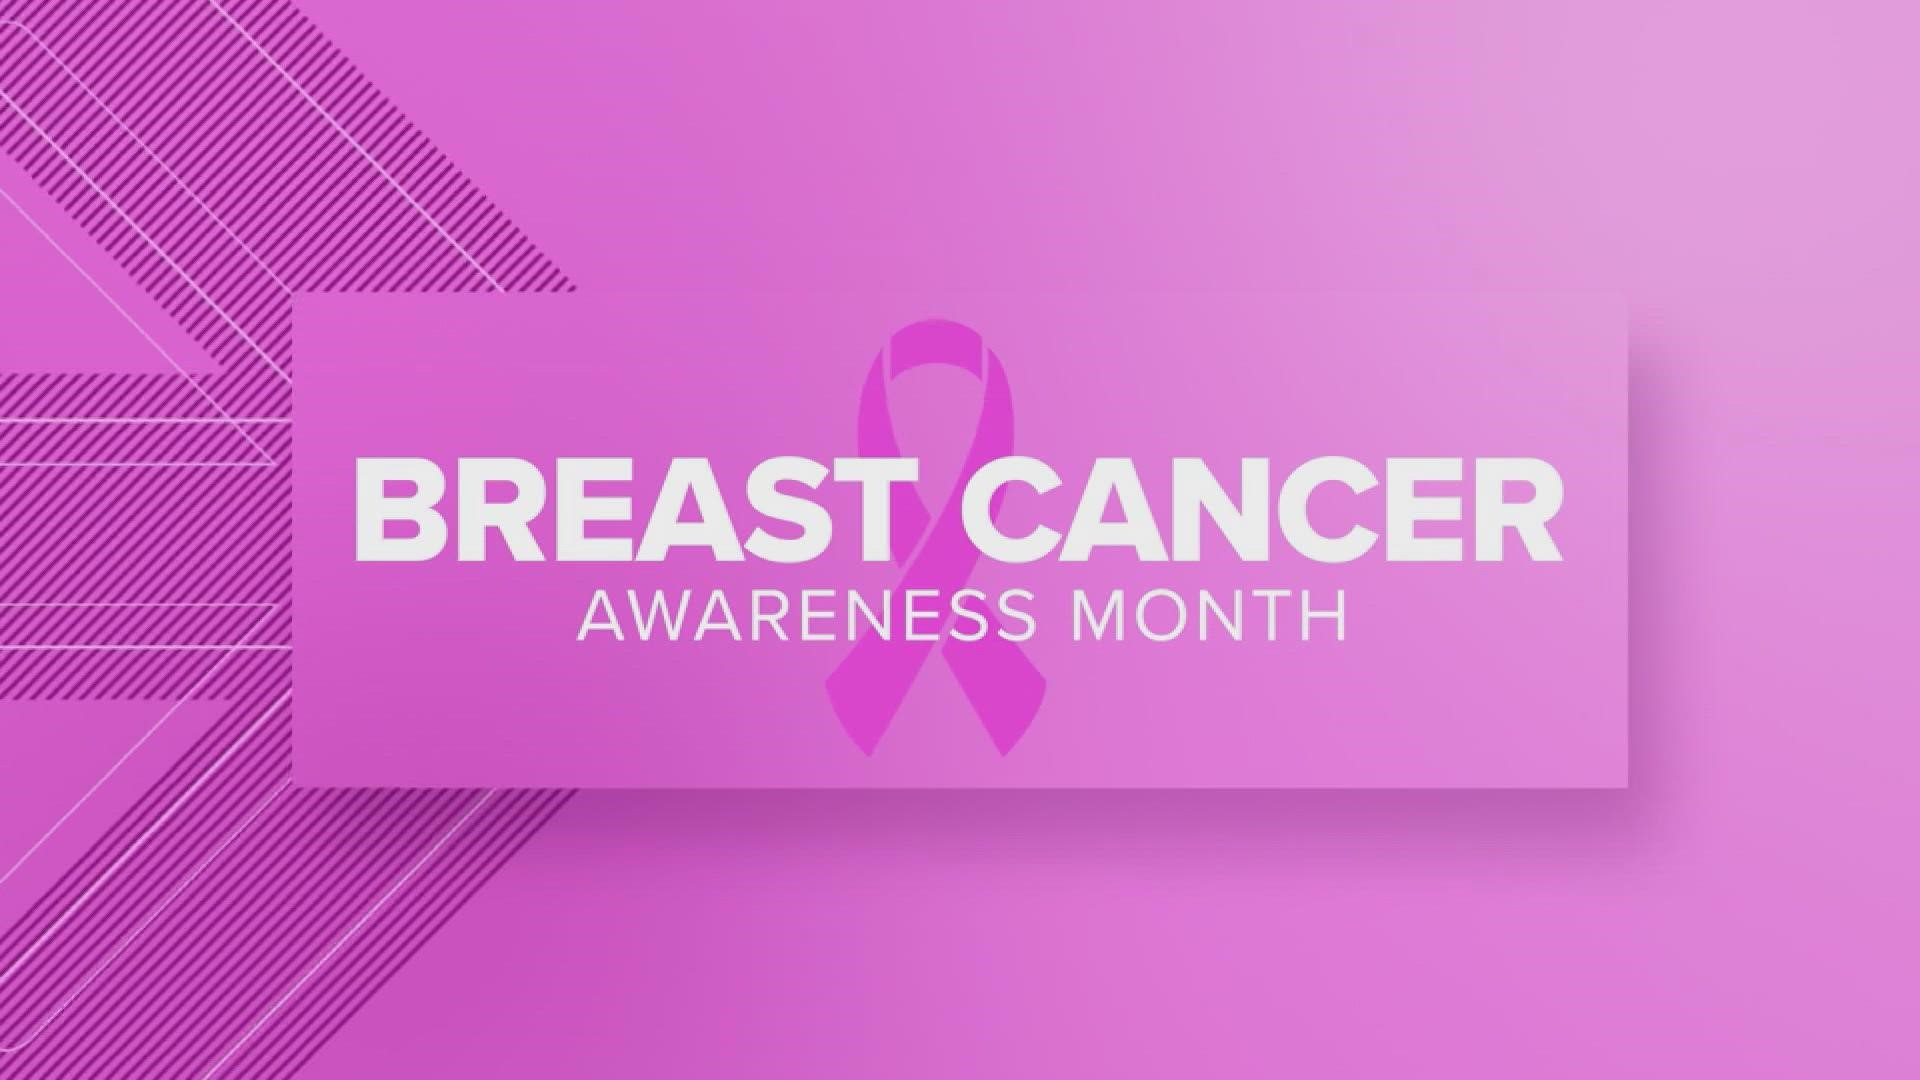 This month is dedicated to the fight against breast cancer, to promote awareness and resources.